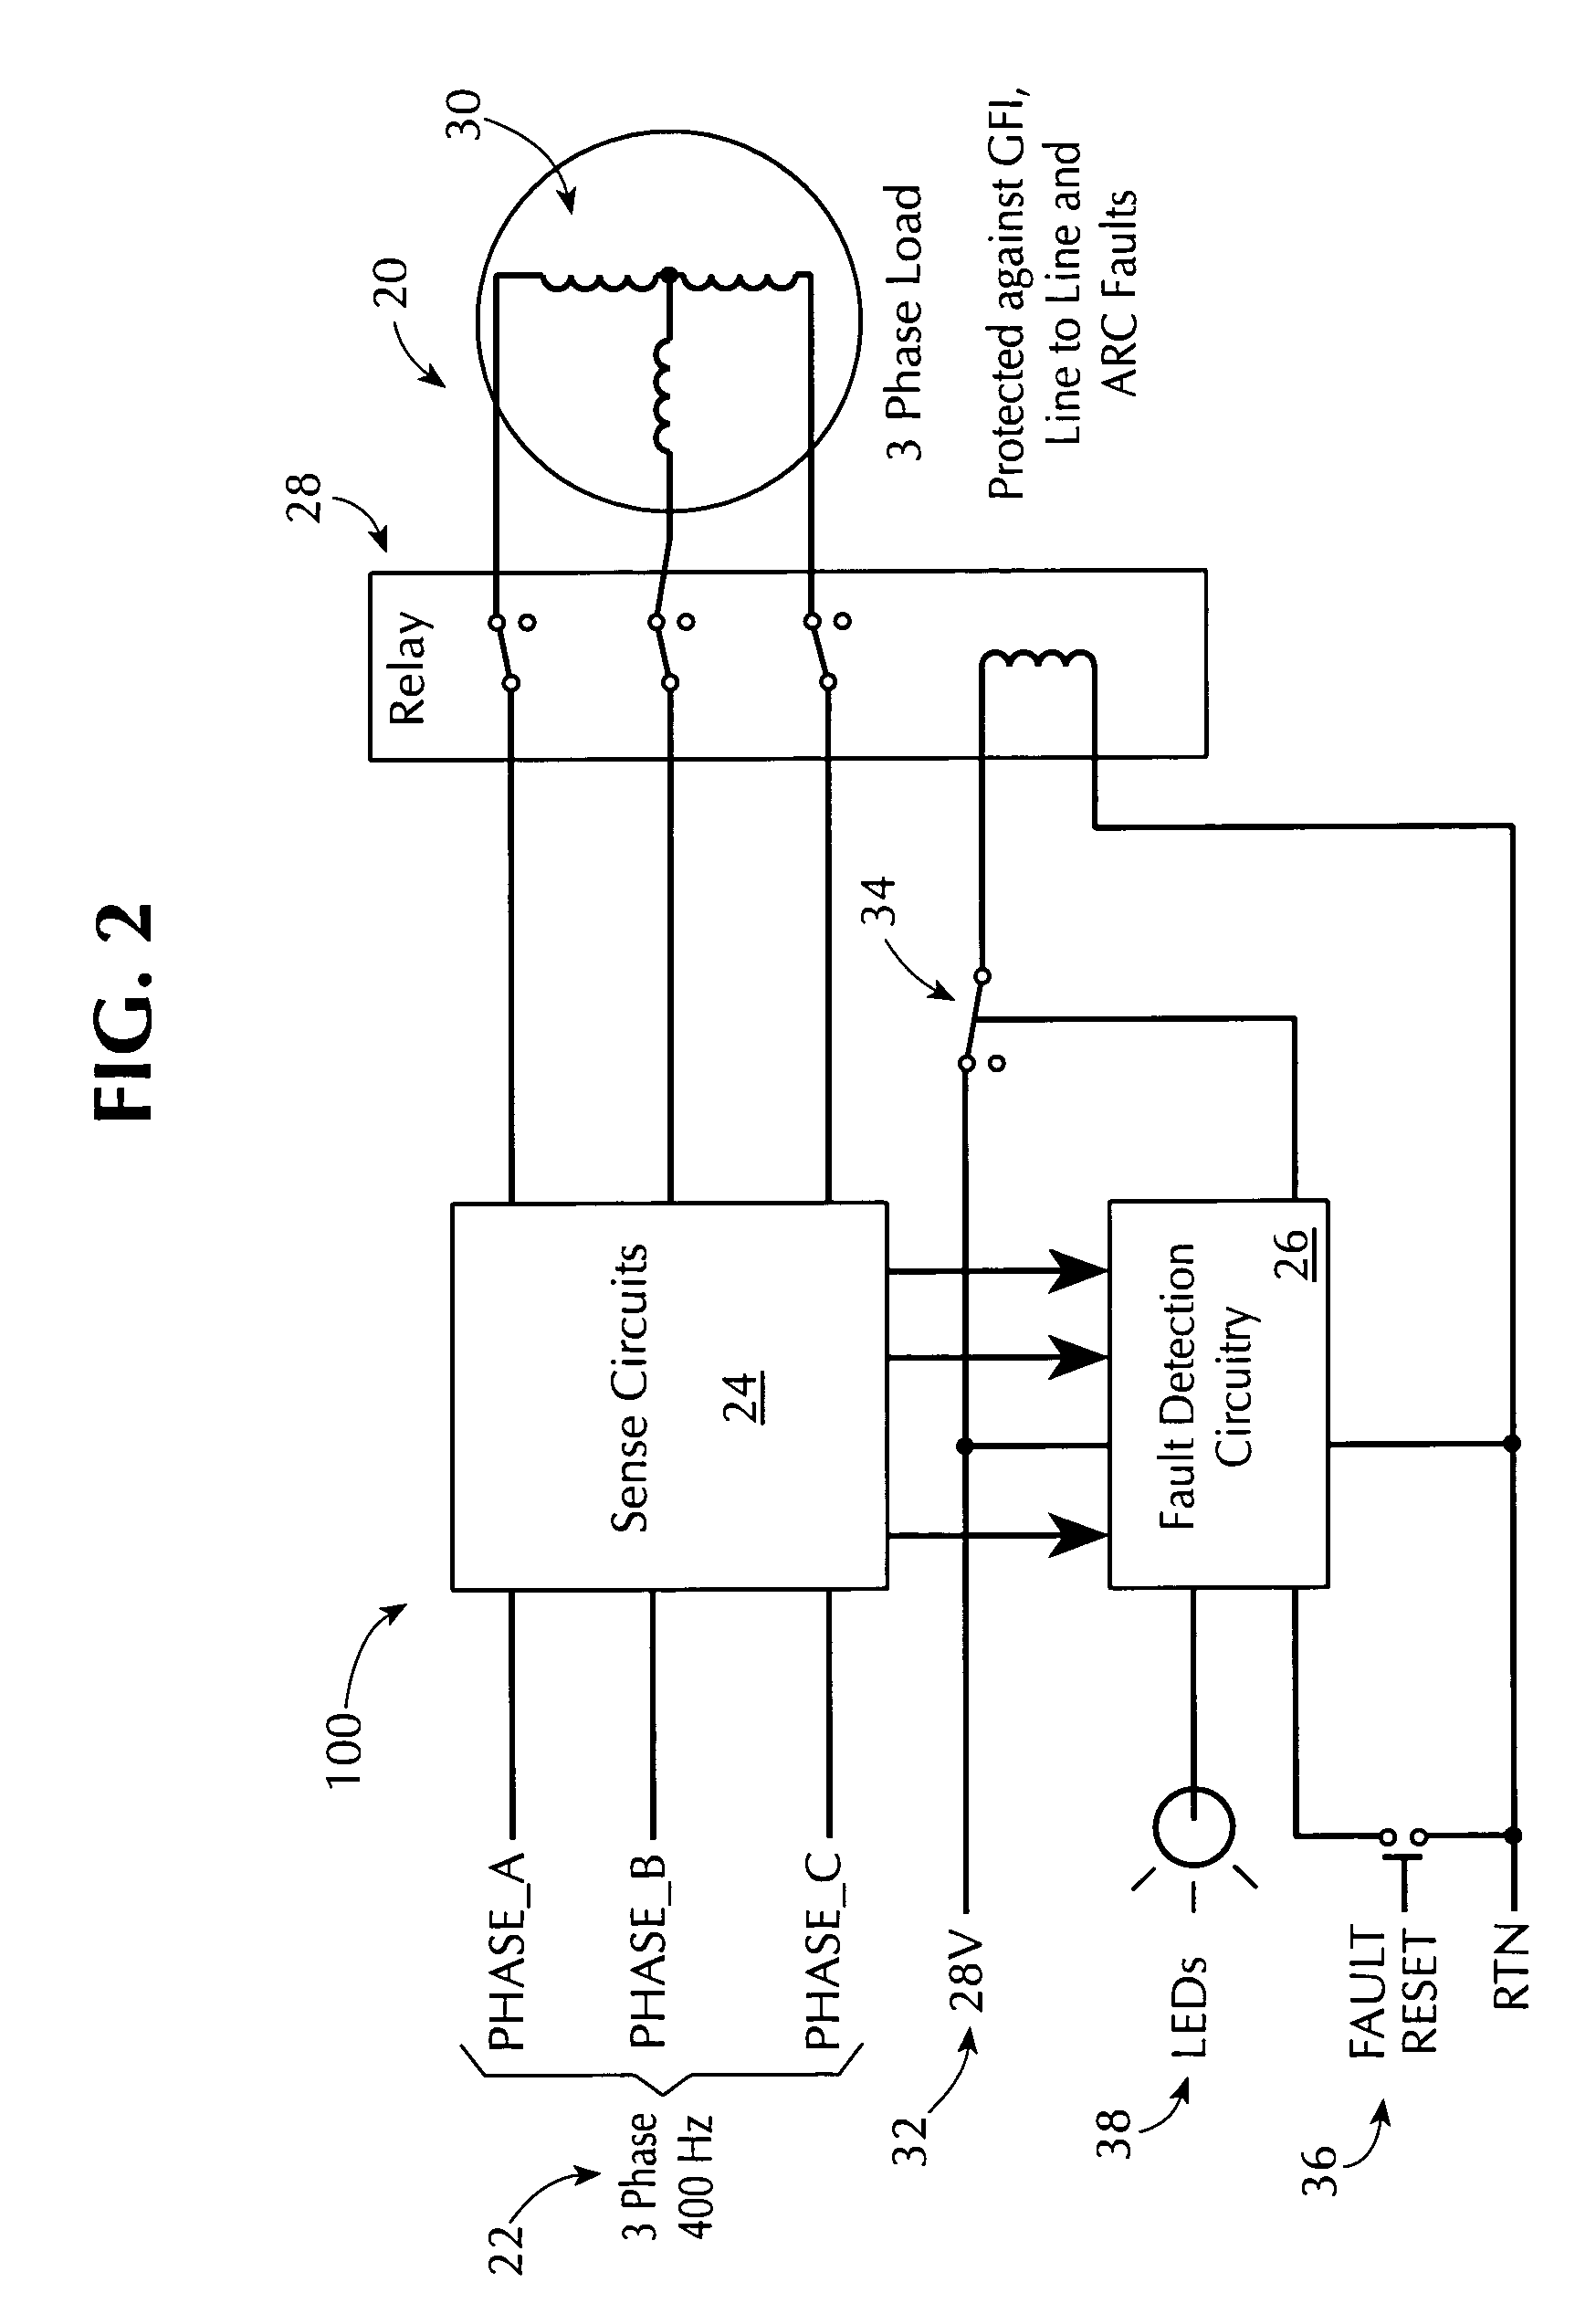 Systems and methods for fault-based power signal interruption